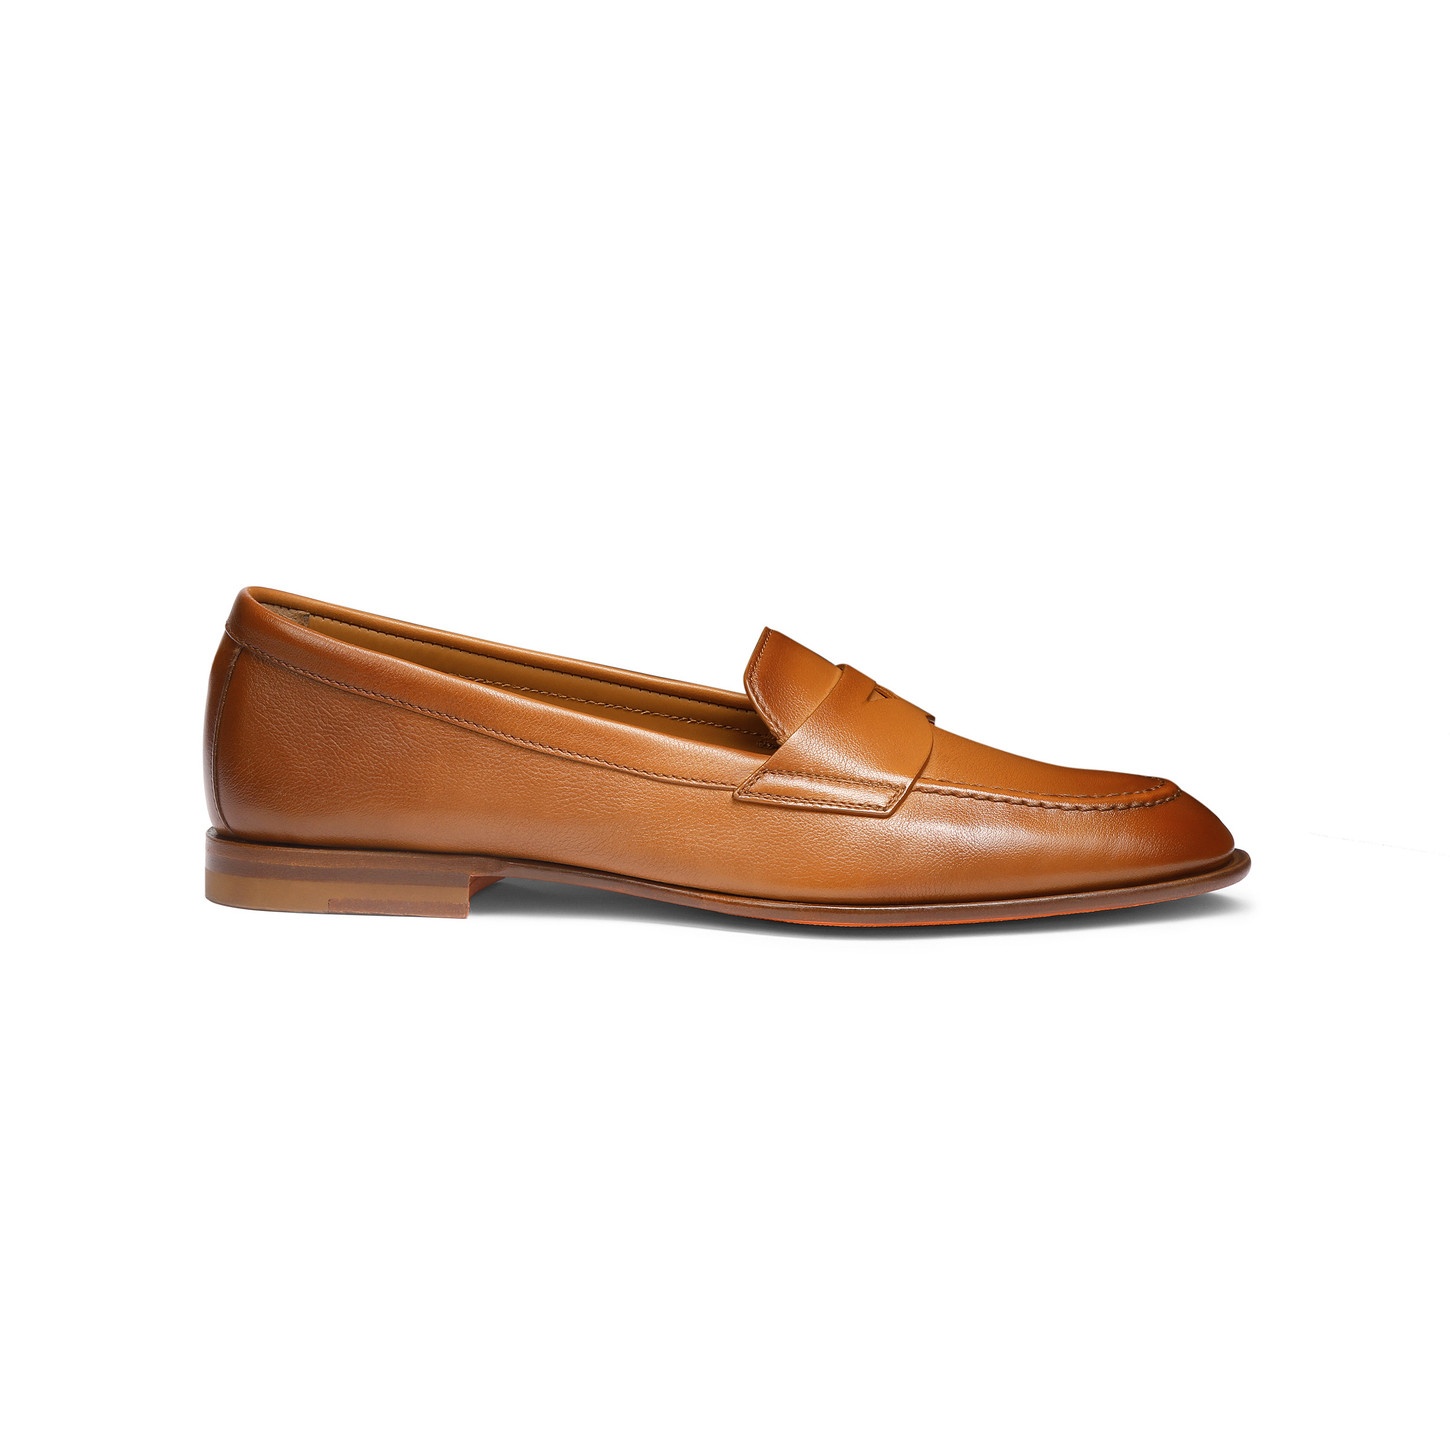 Women’s brown leather penny loafer - 1